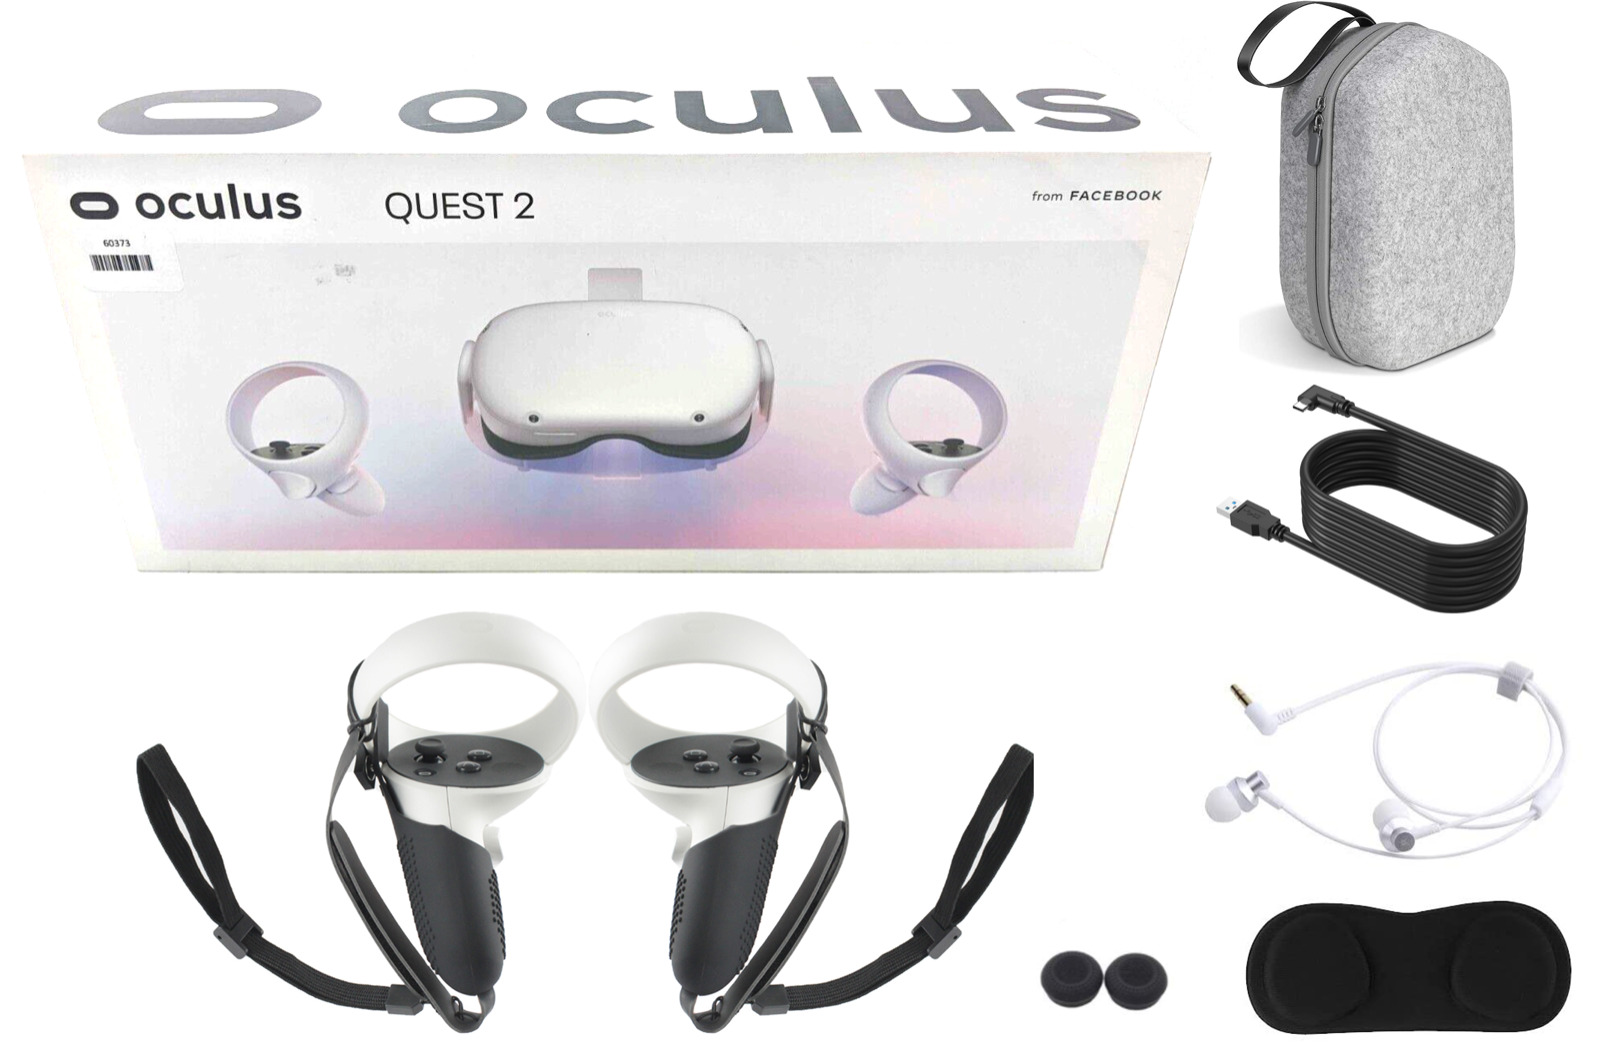 Oculus - Quest 2 Advanced All-In-One Virtual Reality Headset - 256GB ON SALE AT BEST BUY!